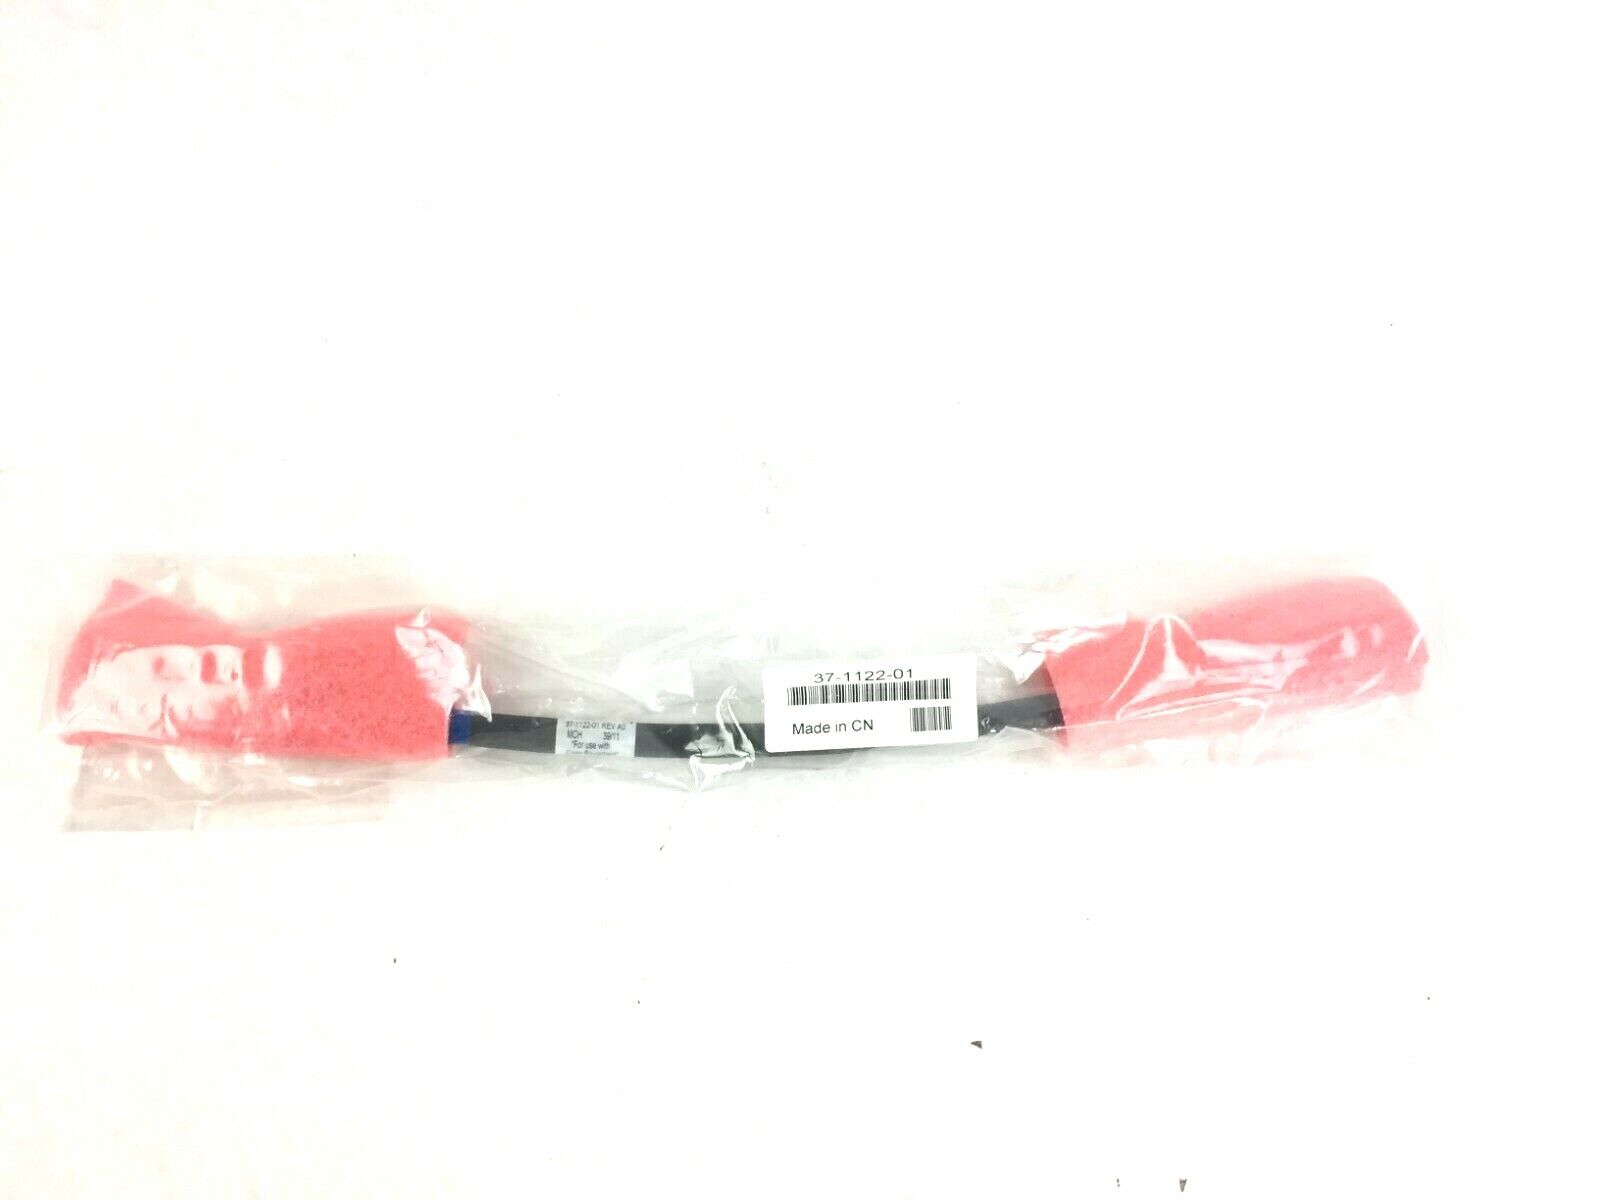 Brand New Sealed Cisco 37-1121-01 Stack Power Cable